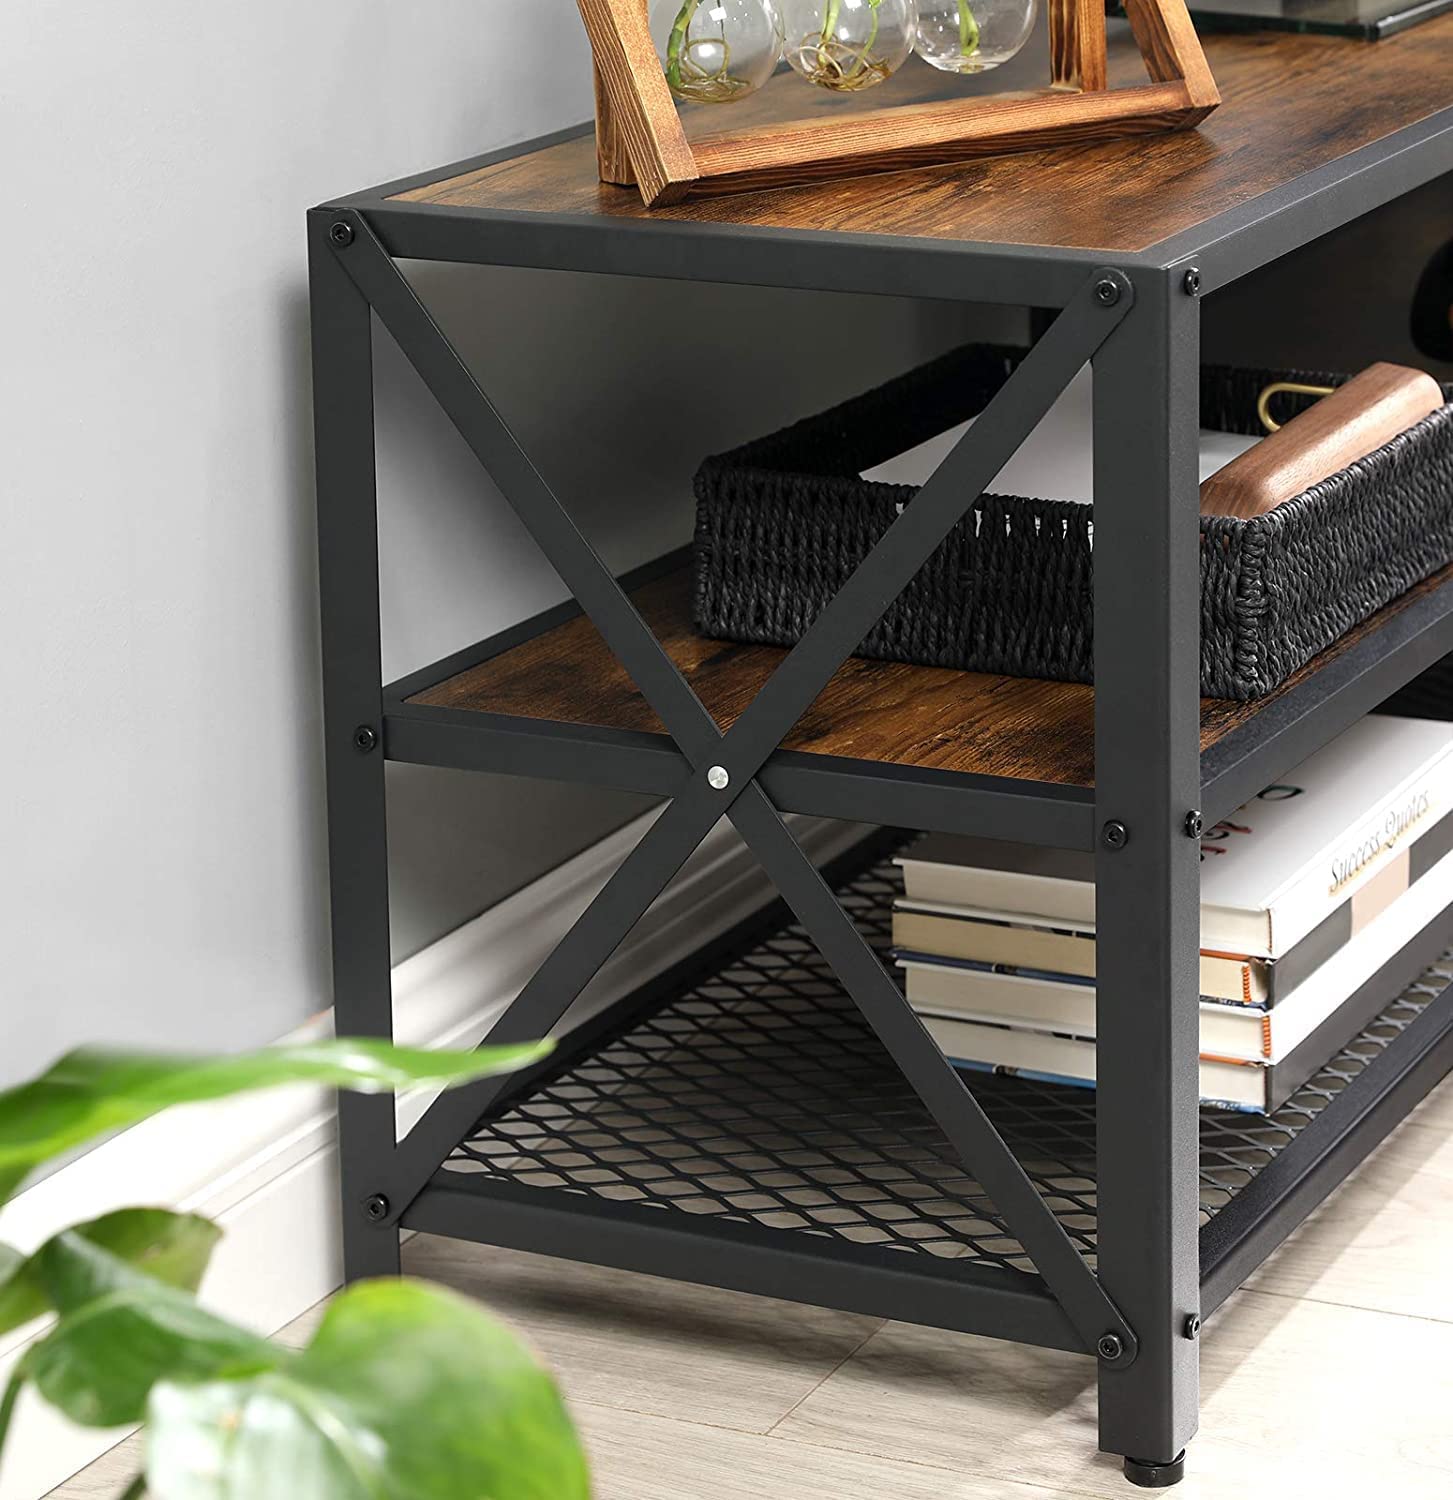 TV Stand for TV Steel Frame up to 178 cm with Shelves for Living Room and Bedroom Furniture Rustic Brown and Black